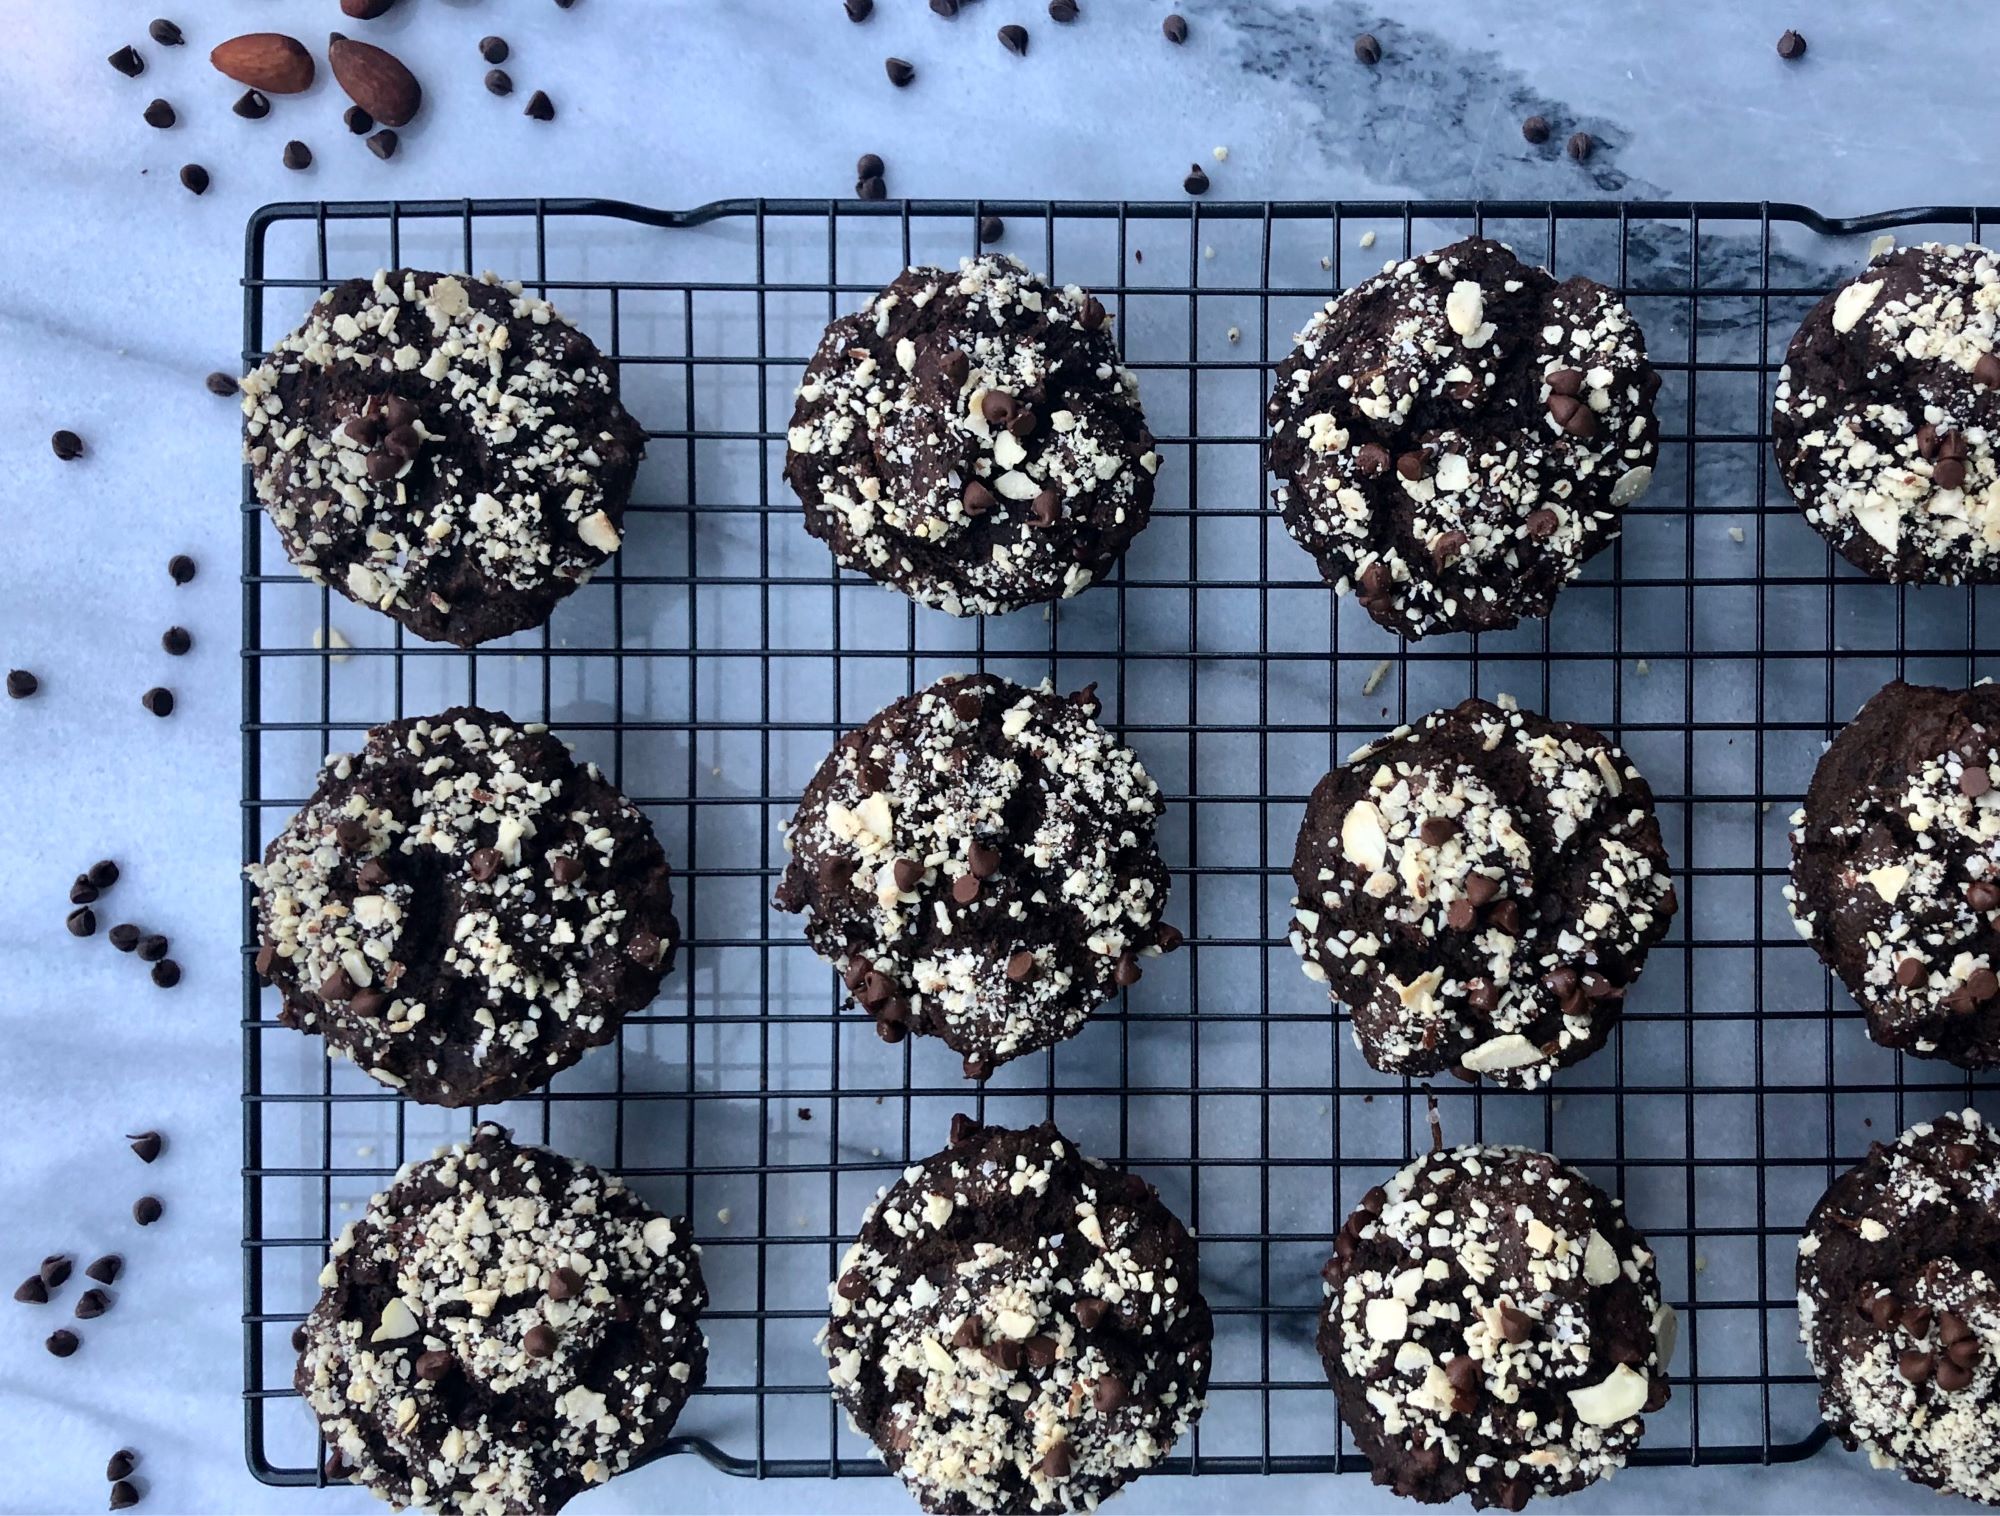 Double Chocolate Zucchini Breakfast Muffins with Almonds